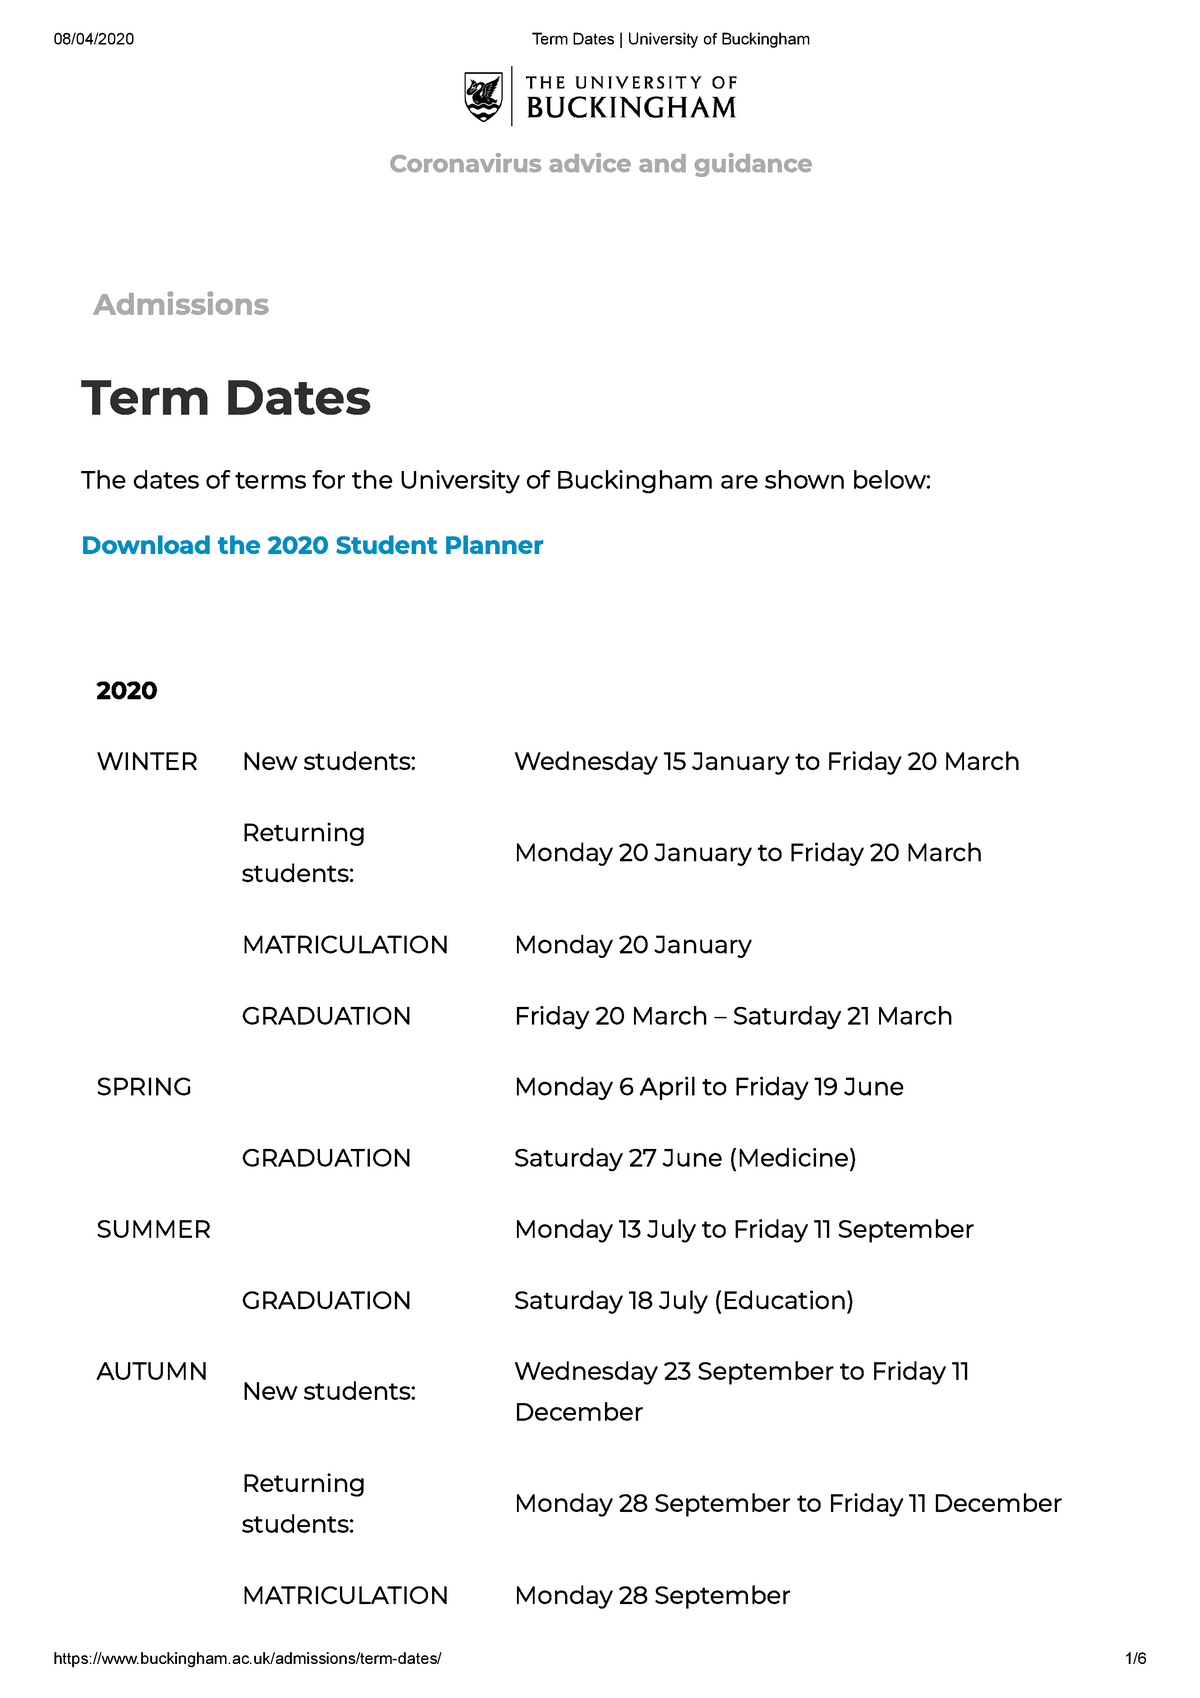 Term Dates University of Buckingham Term Dates The dates of terms for